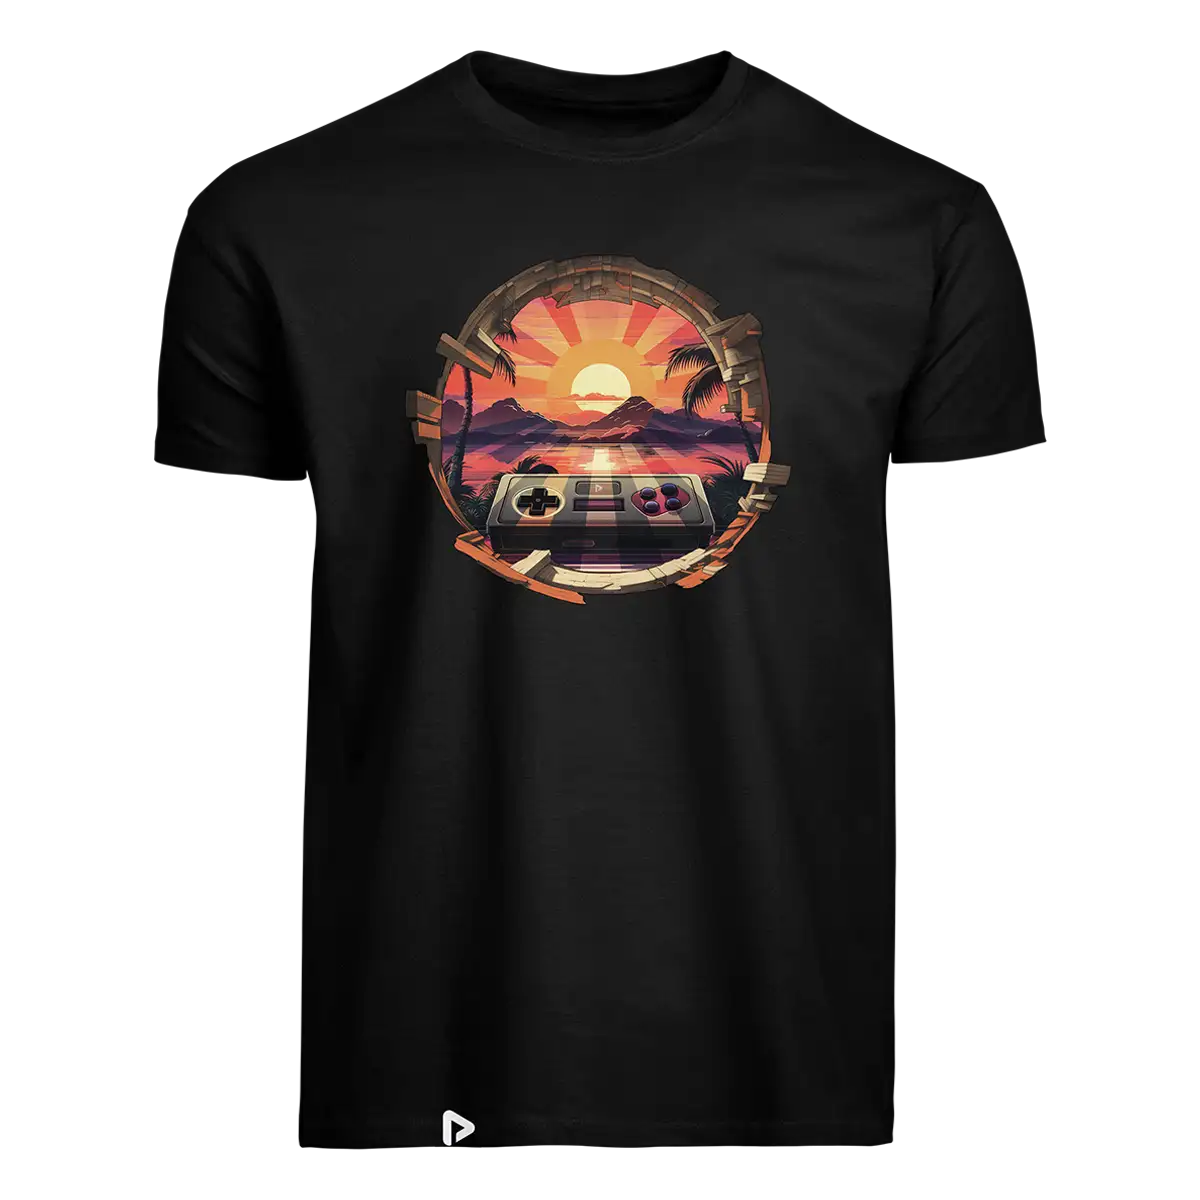 Game Sunset T-Shirt Cover